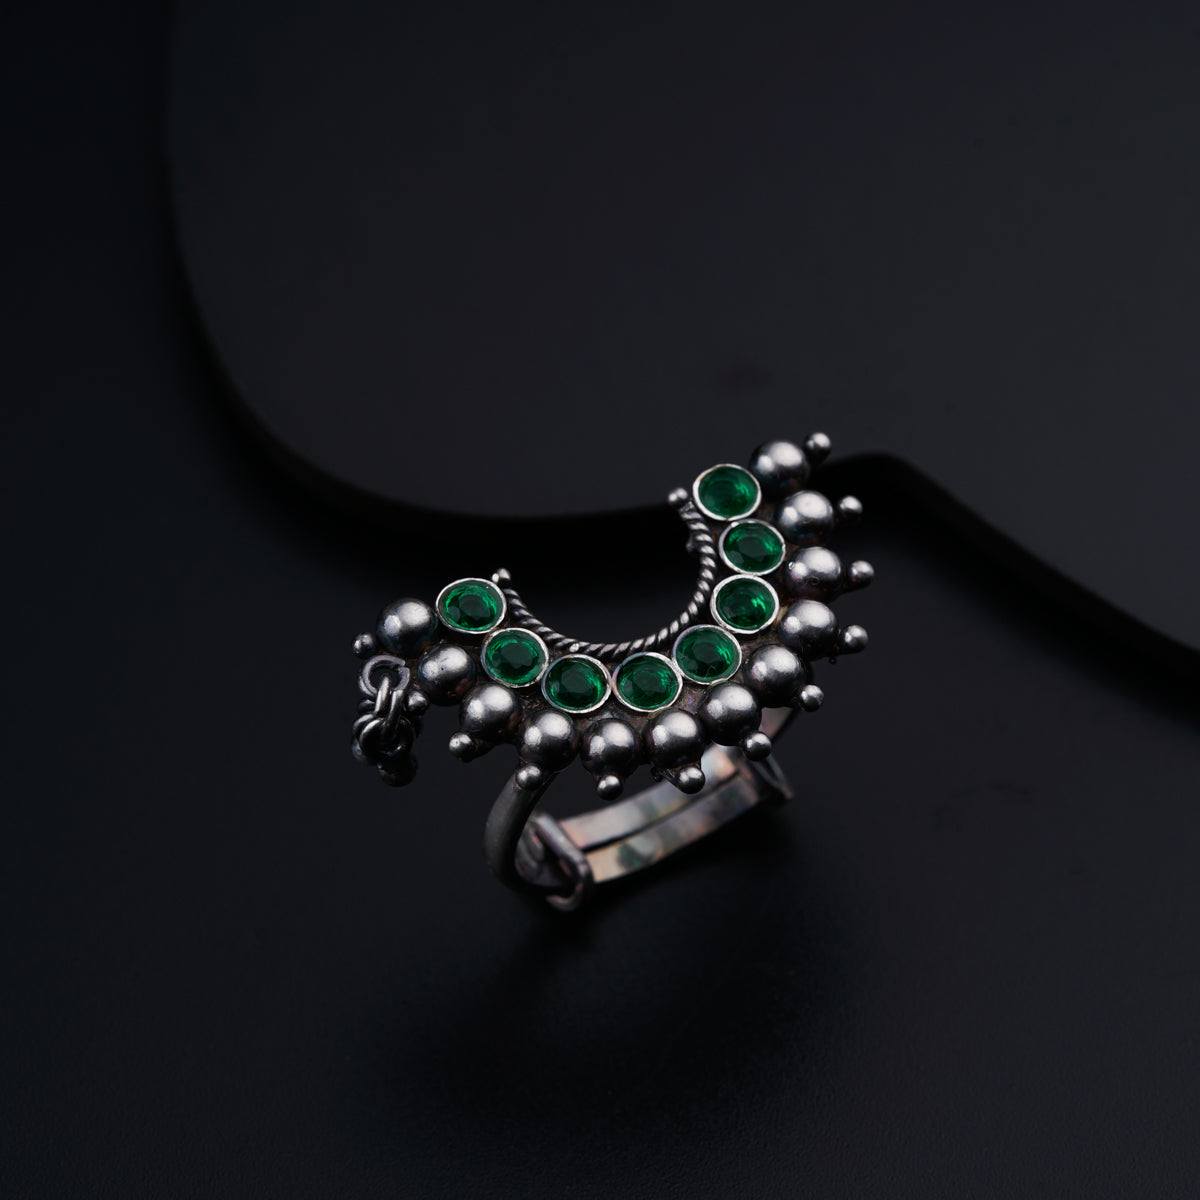 a silver ring with green stones on a black surface